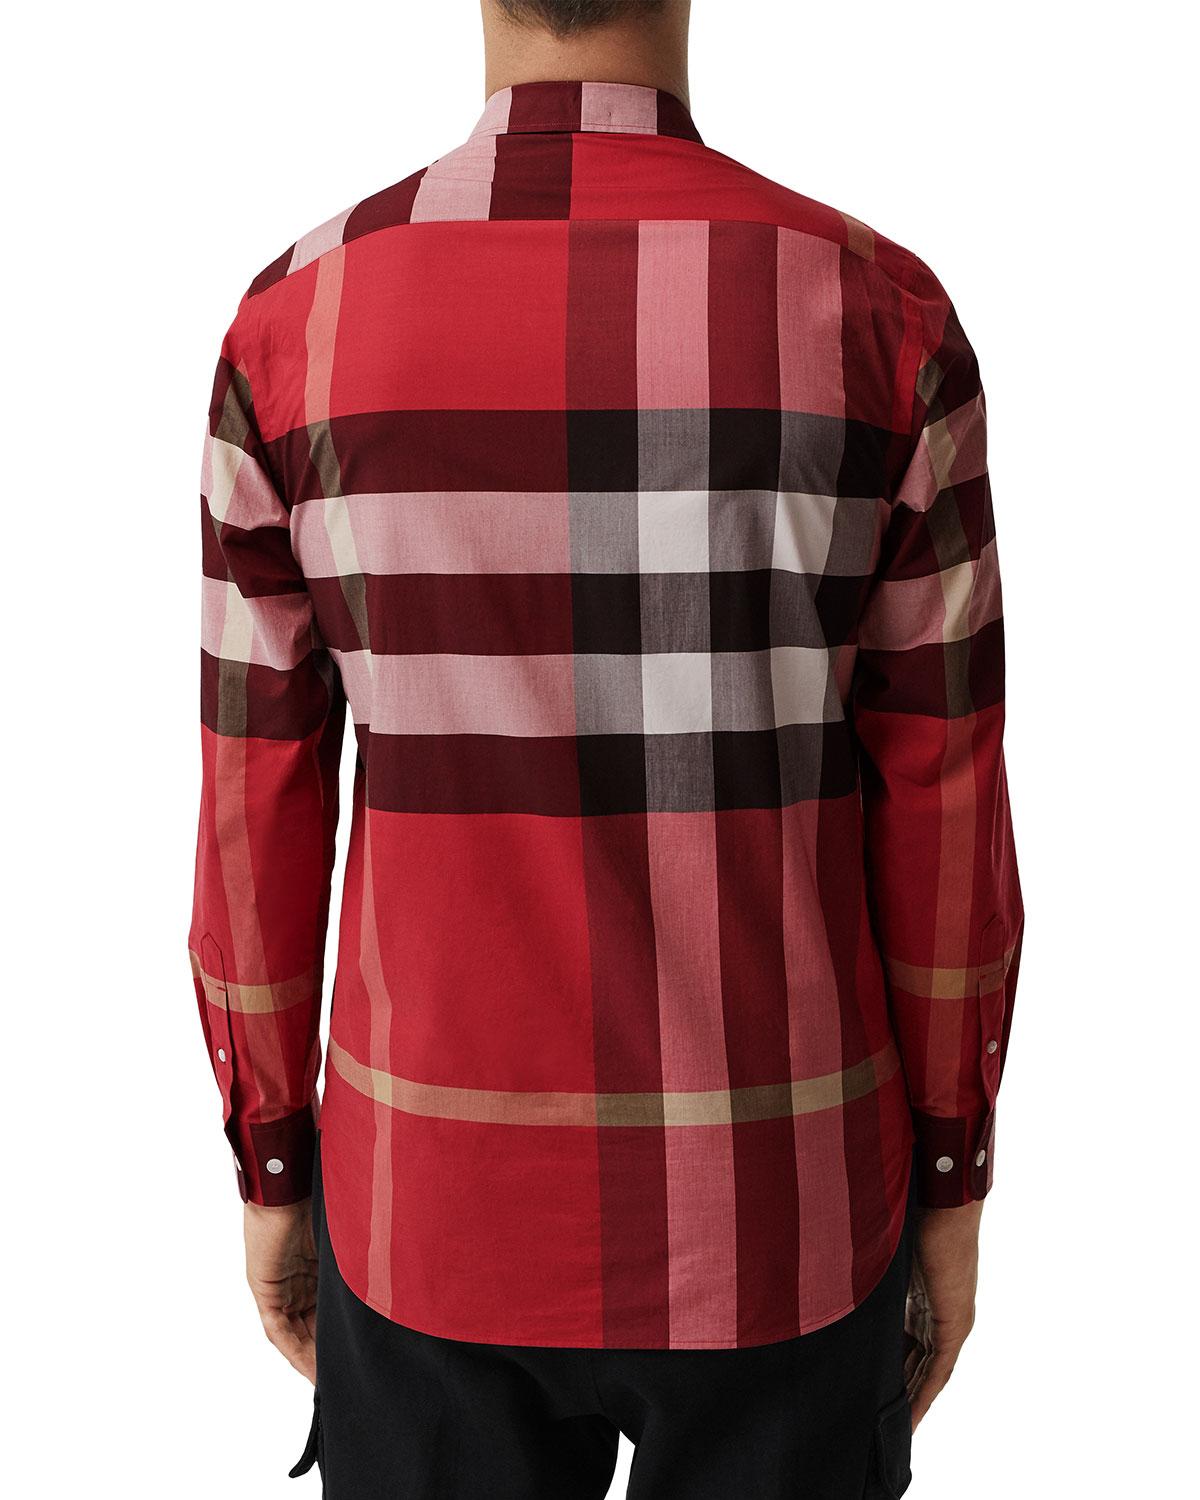 Burberry Check Stretch Cotton Shirt in Red for Men - Lyst